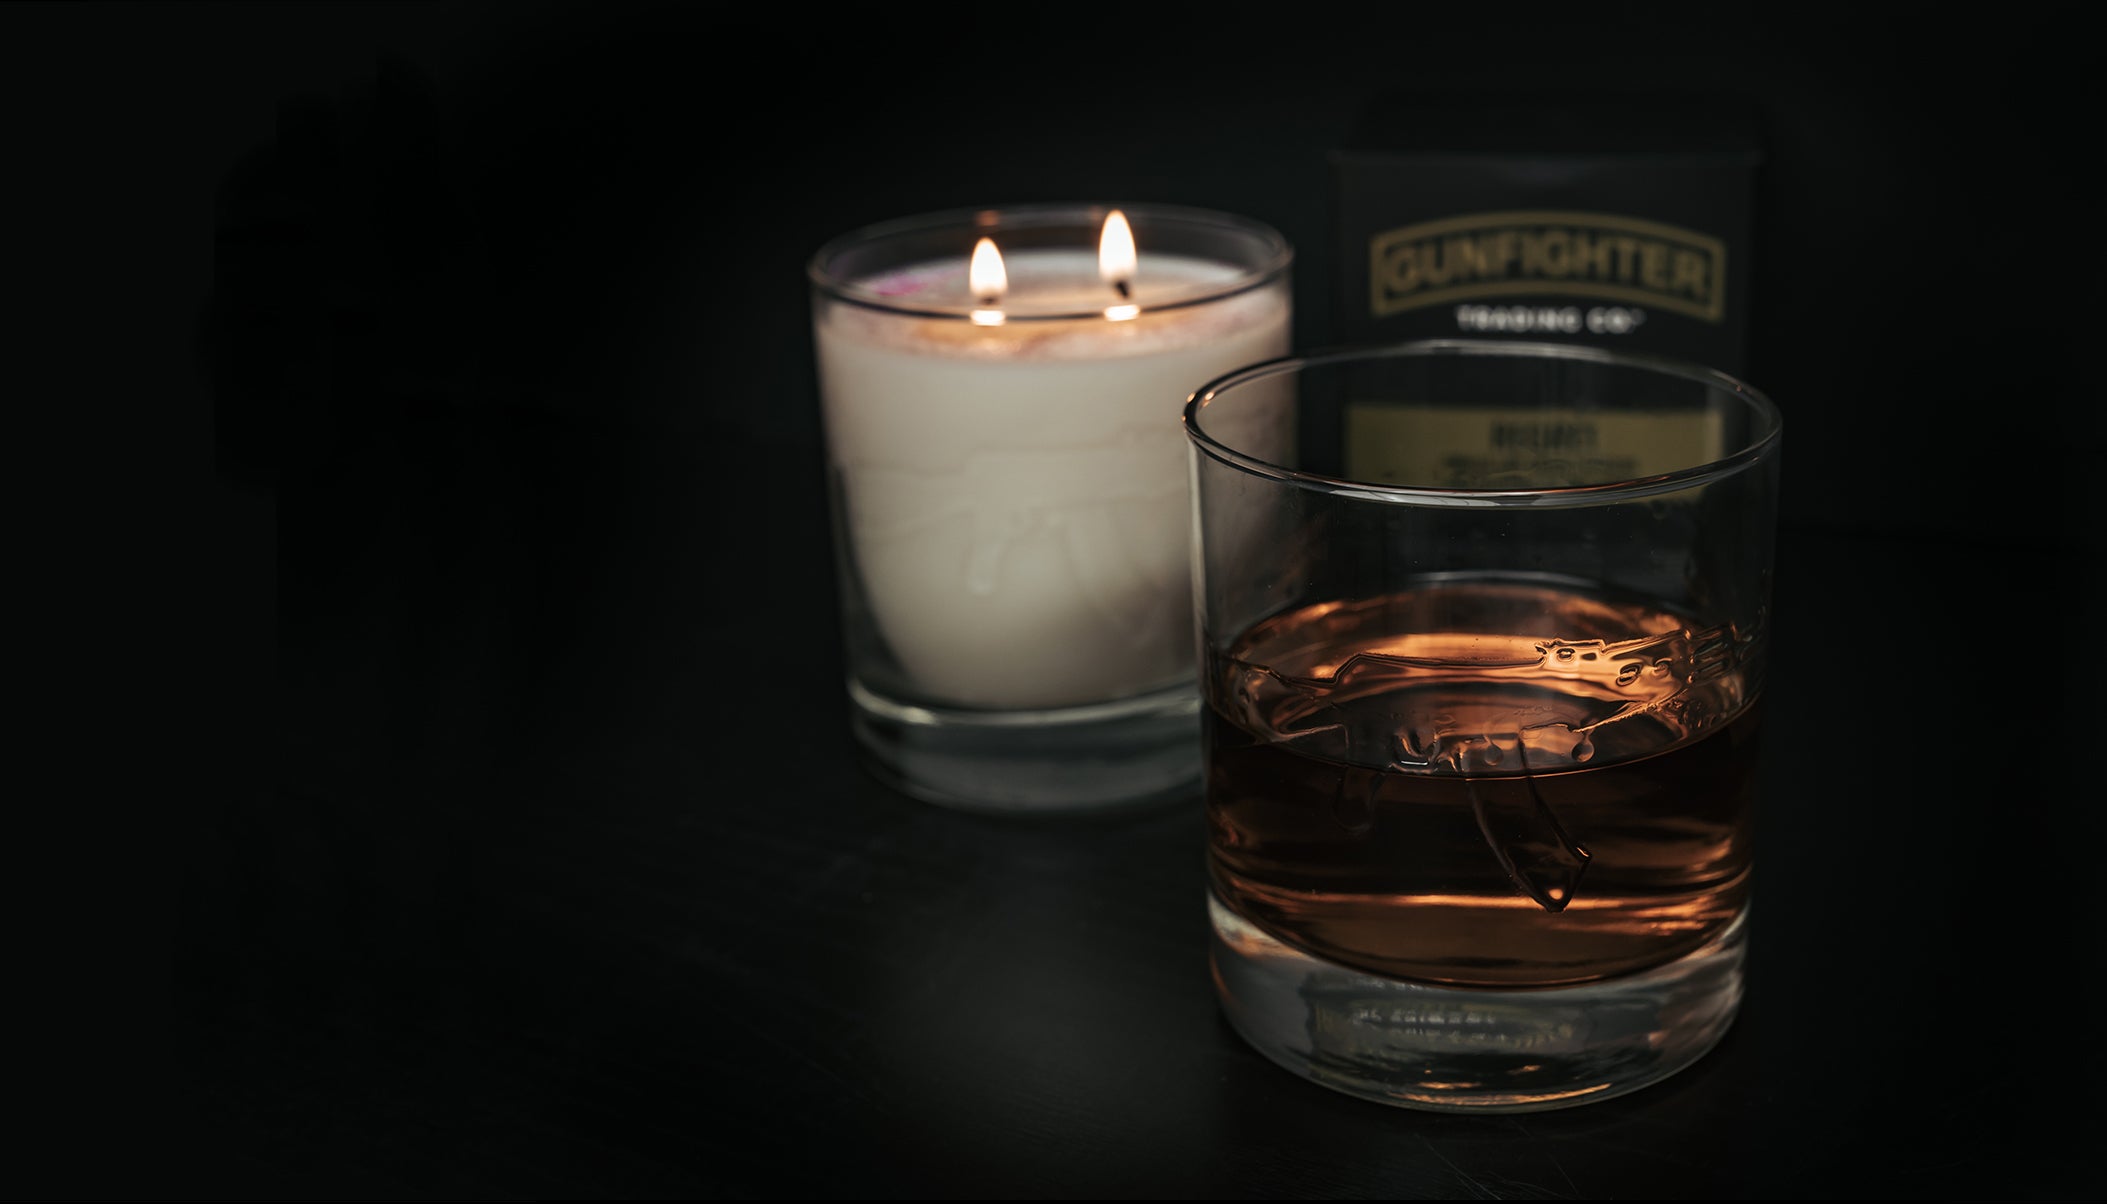 Rocks glass with embossed AK47 half full of bourbon, lit bourbon glass candle, and packaging box